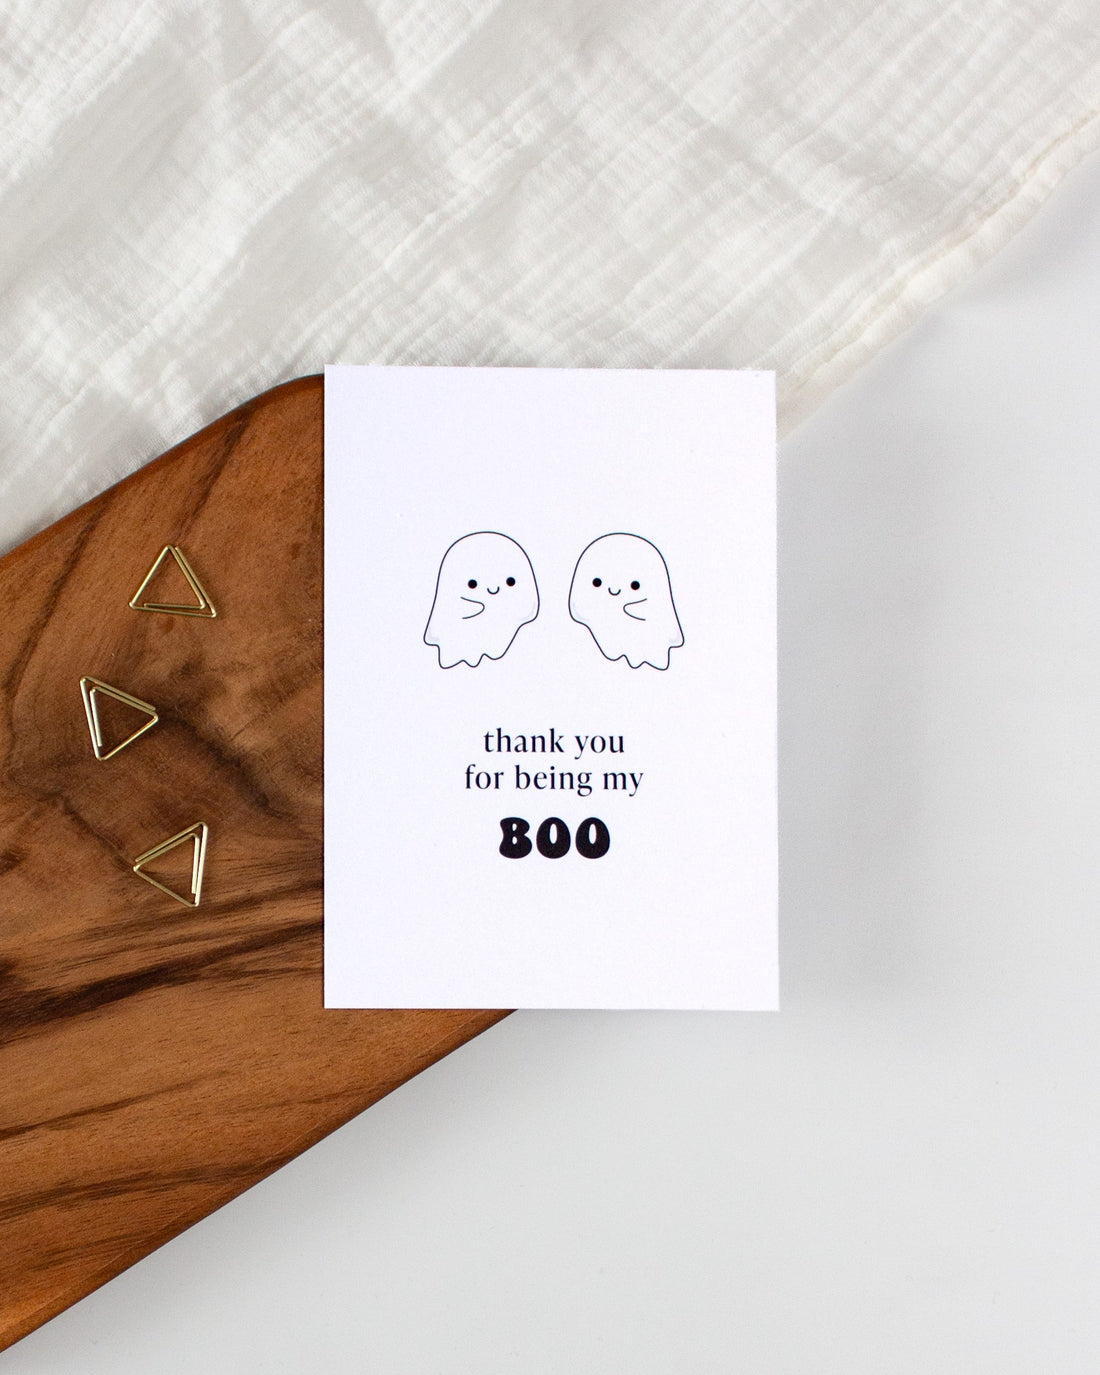 A postcard laying on a wooden board with some golden triangle paperclips and a white cloth in the background. The postcard design shows two adorable ghost drawings and some text saying &quot;thank you for being my boo&quot;.